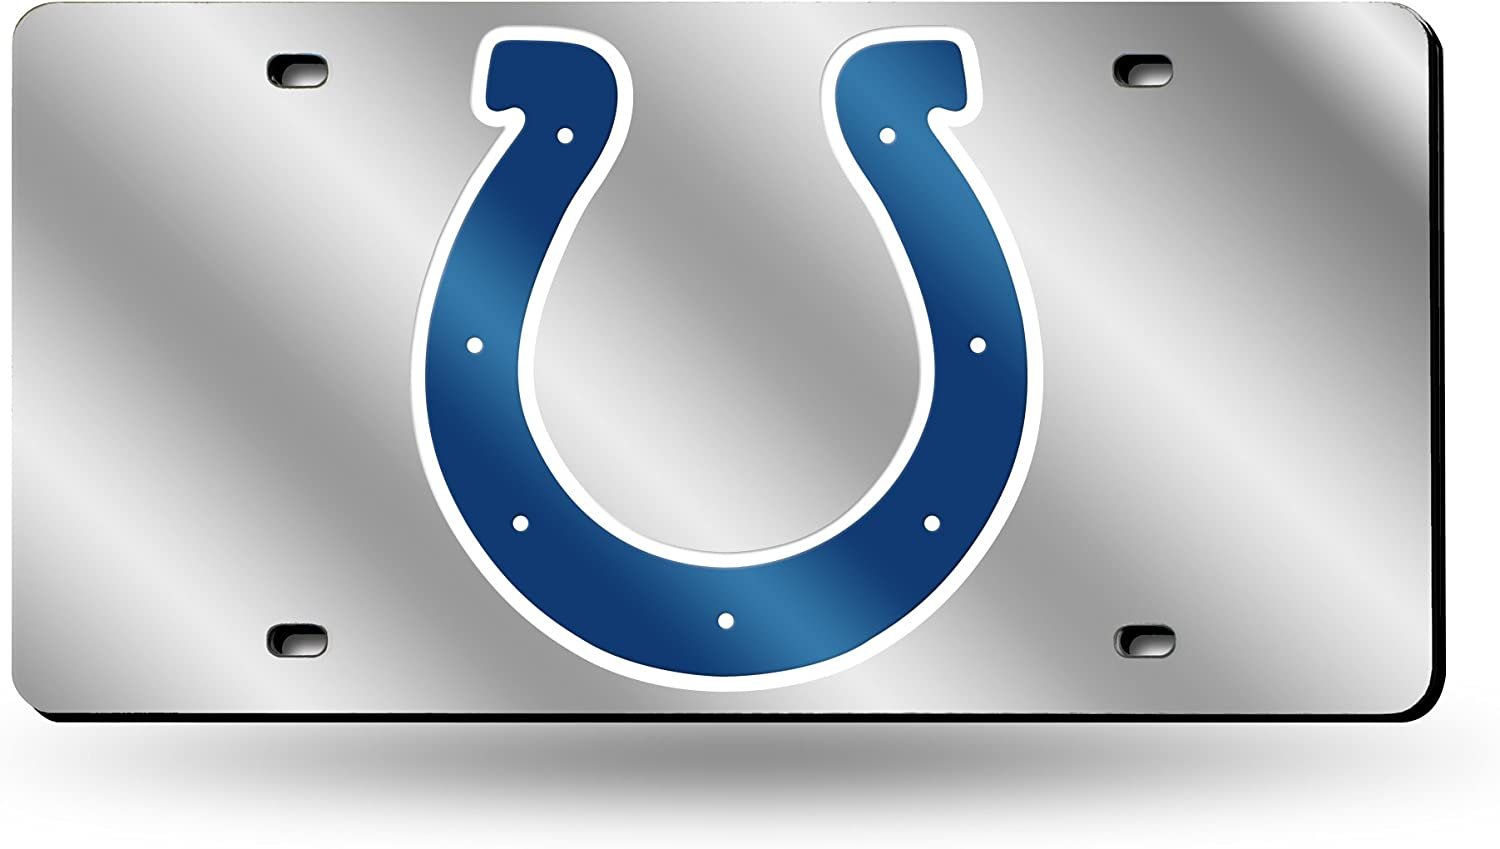 Indianapolis Colts Premium Laser Cut Tag License Plate, Mirrored Acrylic Inlaid, 12x6 Inch